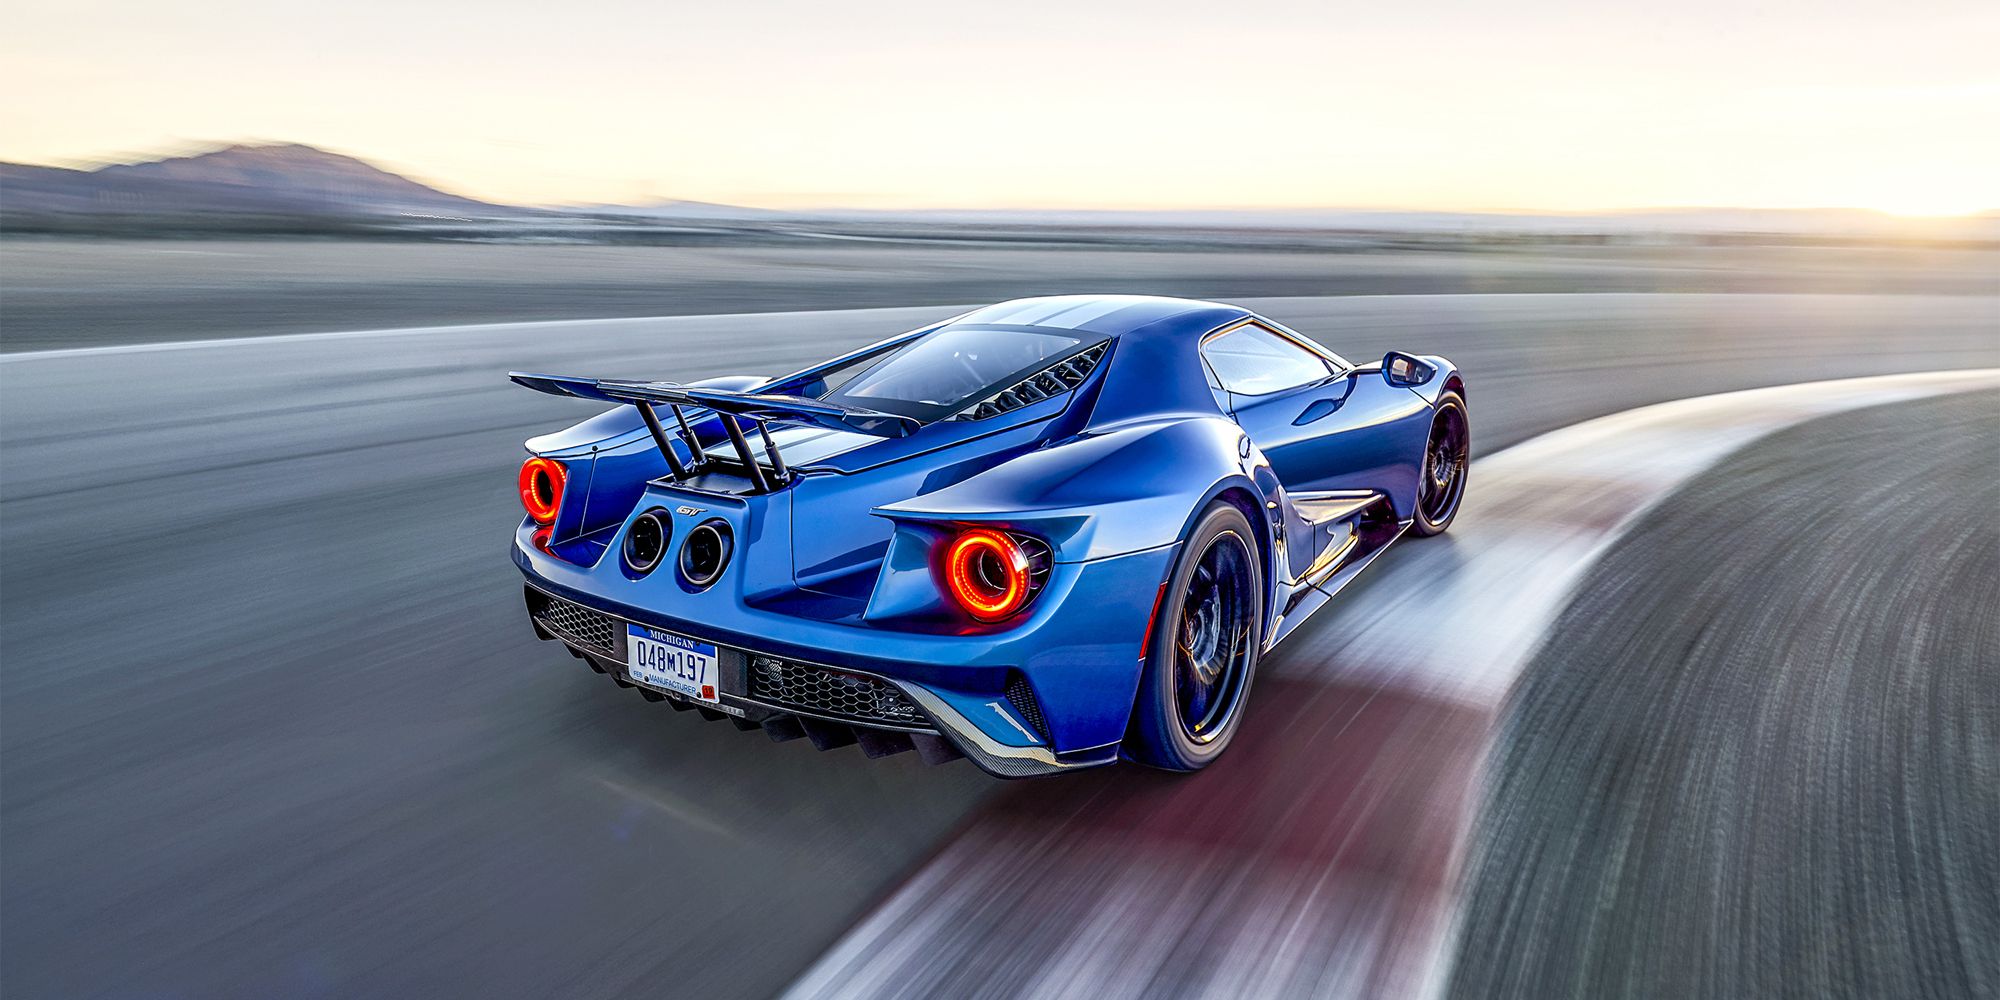 What It's Like to Drive the New 2017 Ford GT - Ford Accepting Applications  to Own $450,000 GT